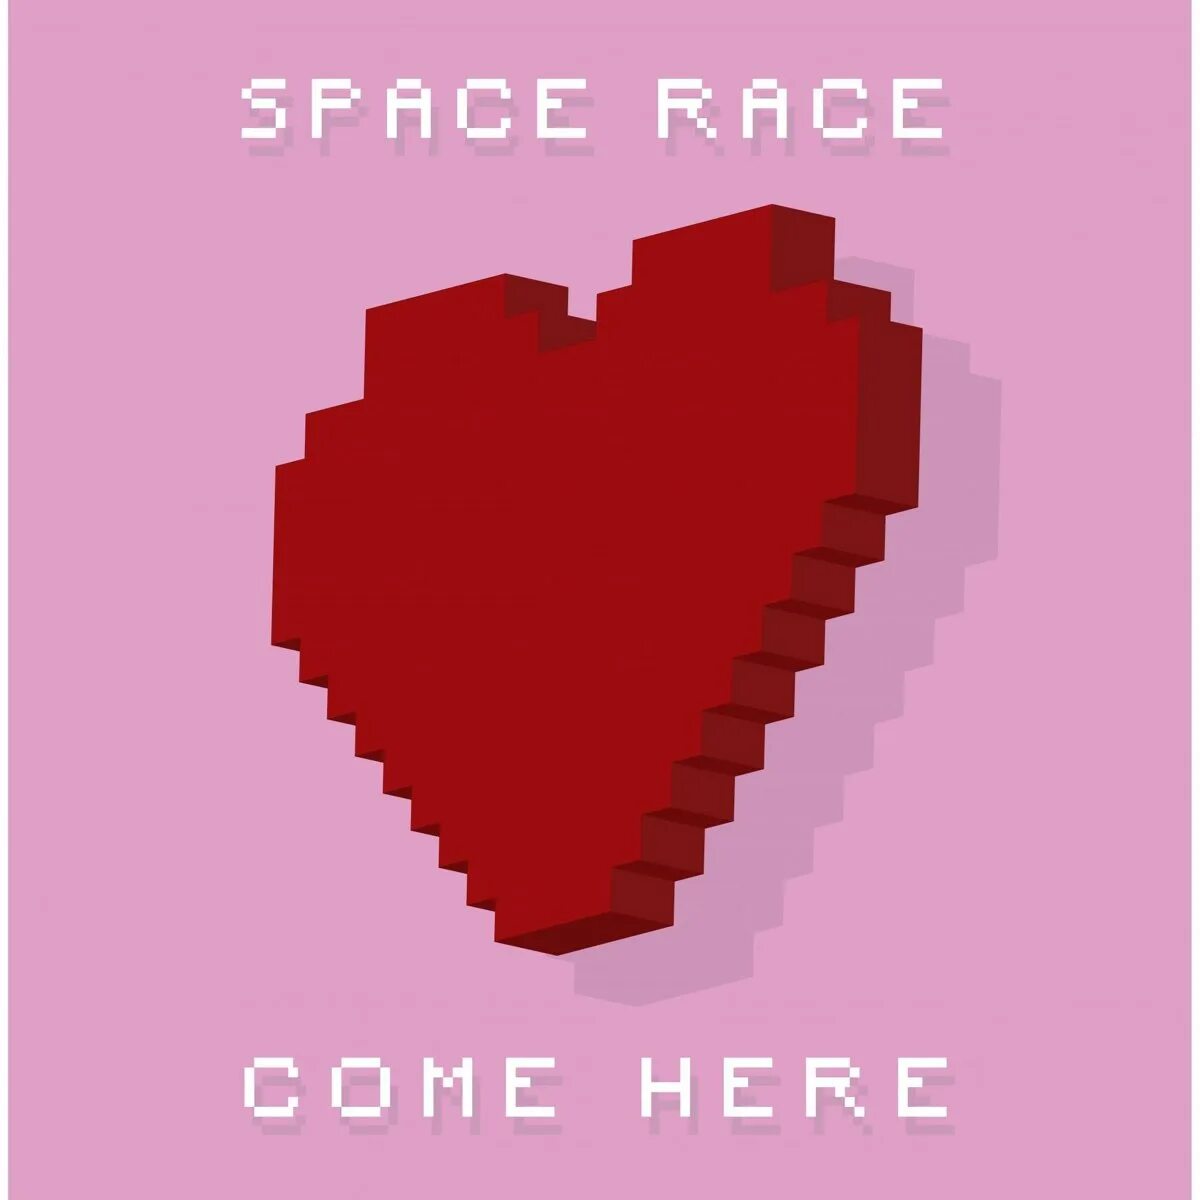 Come here. The Space Race. Space here